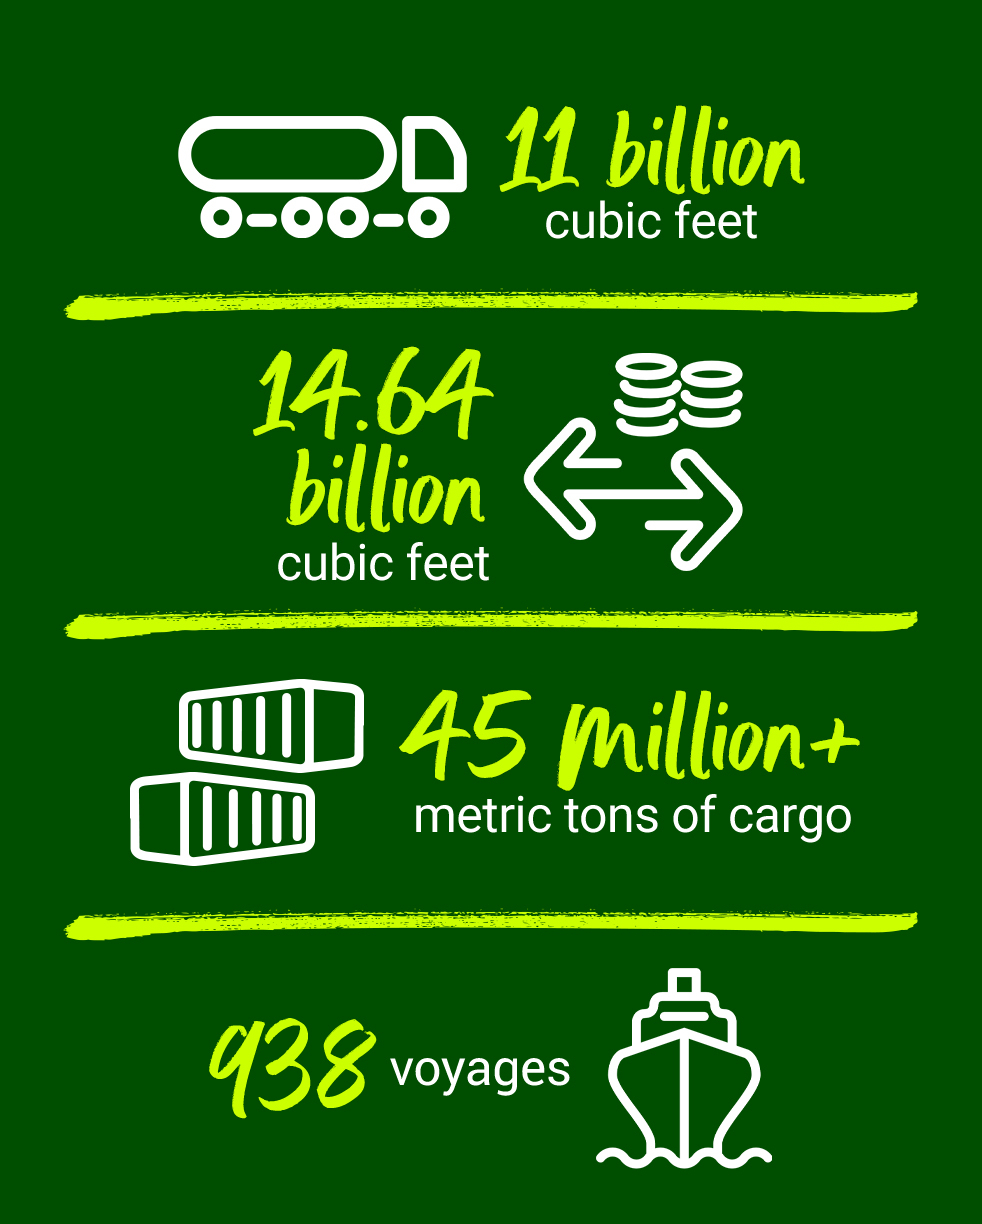 terminals-and-shipping-infographic-portrait.jpg